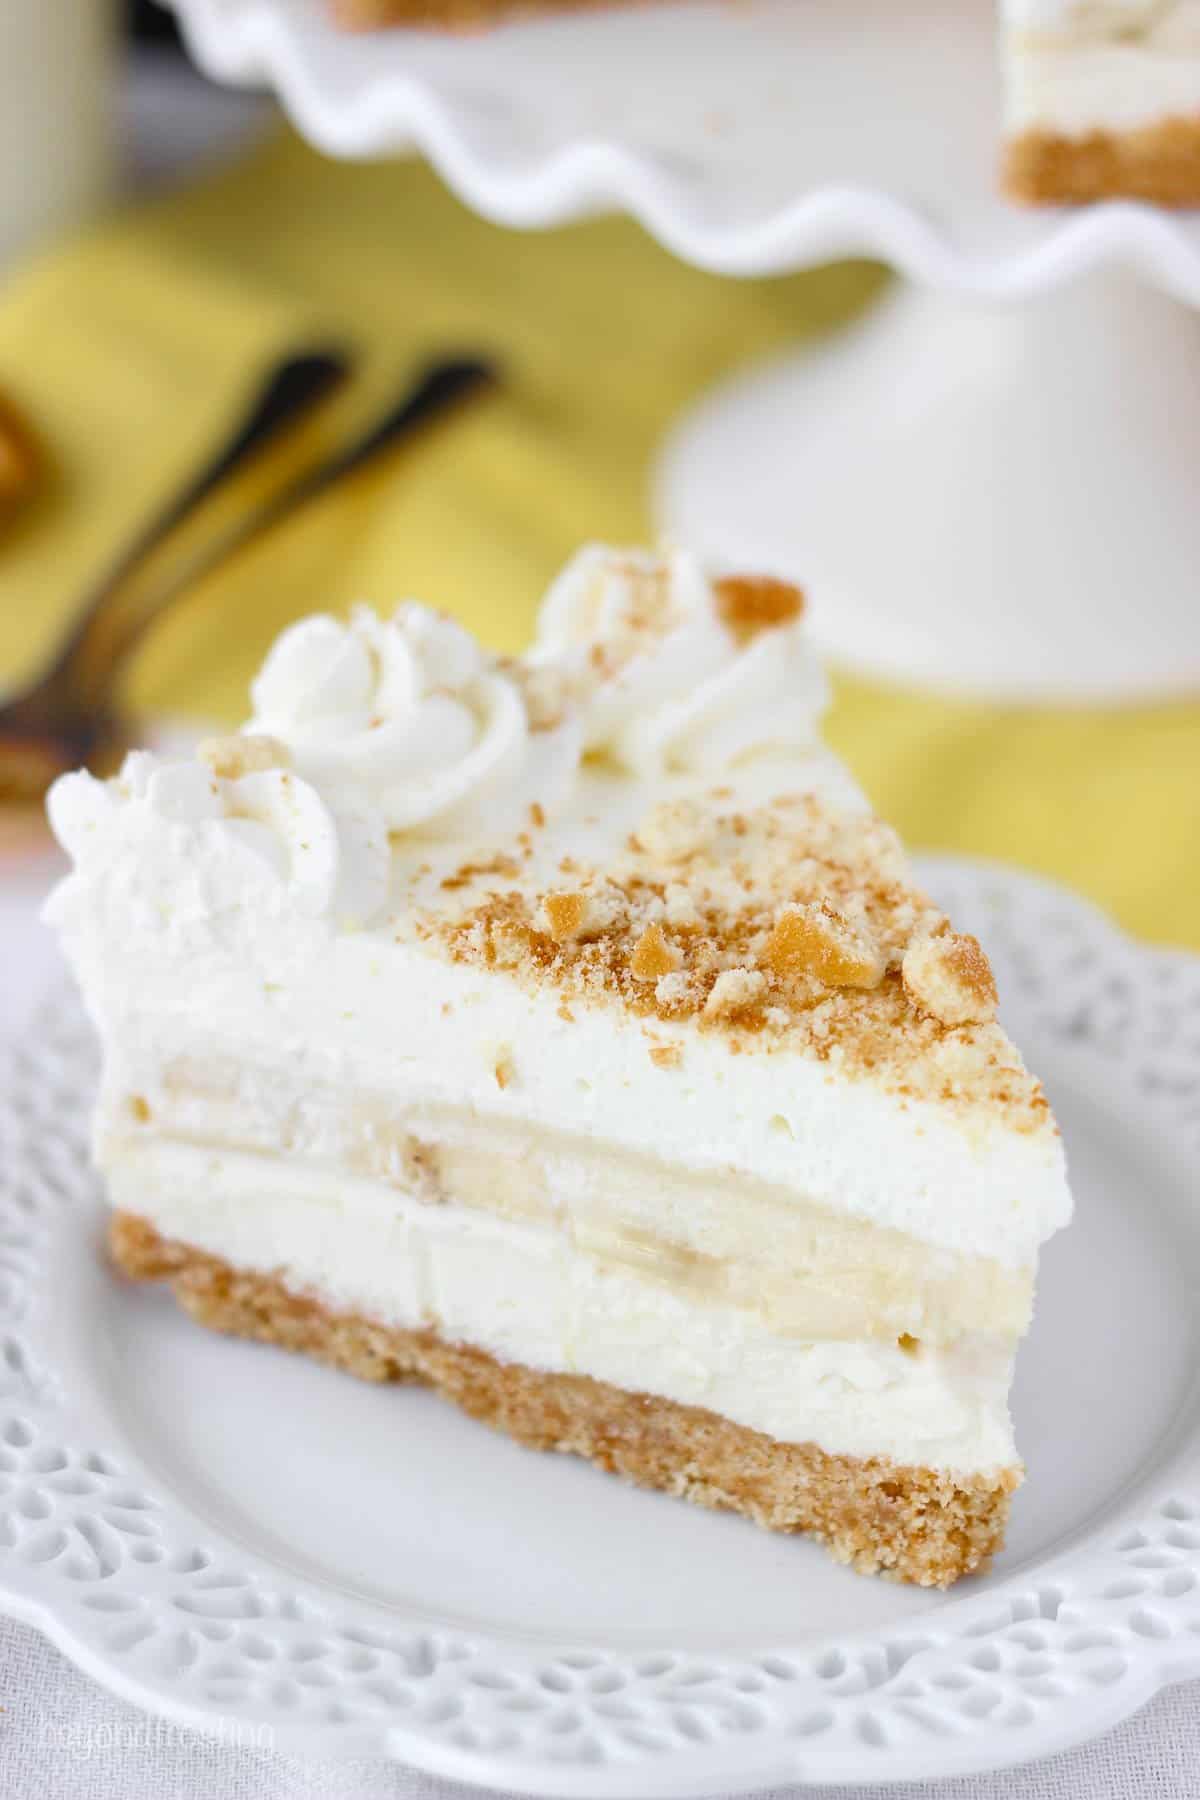 A slice of no-bake banana pudding cheesecake topped with Nilla wafer crumbs on a dessert plate